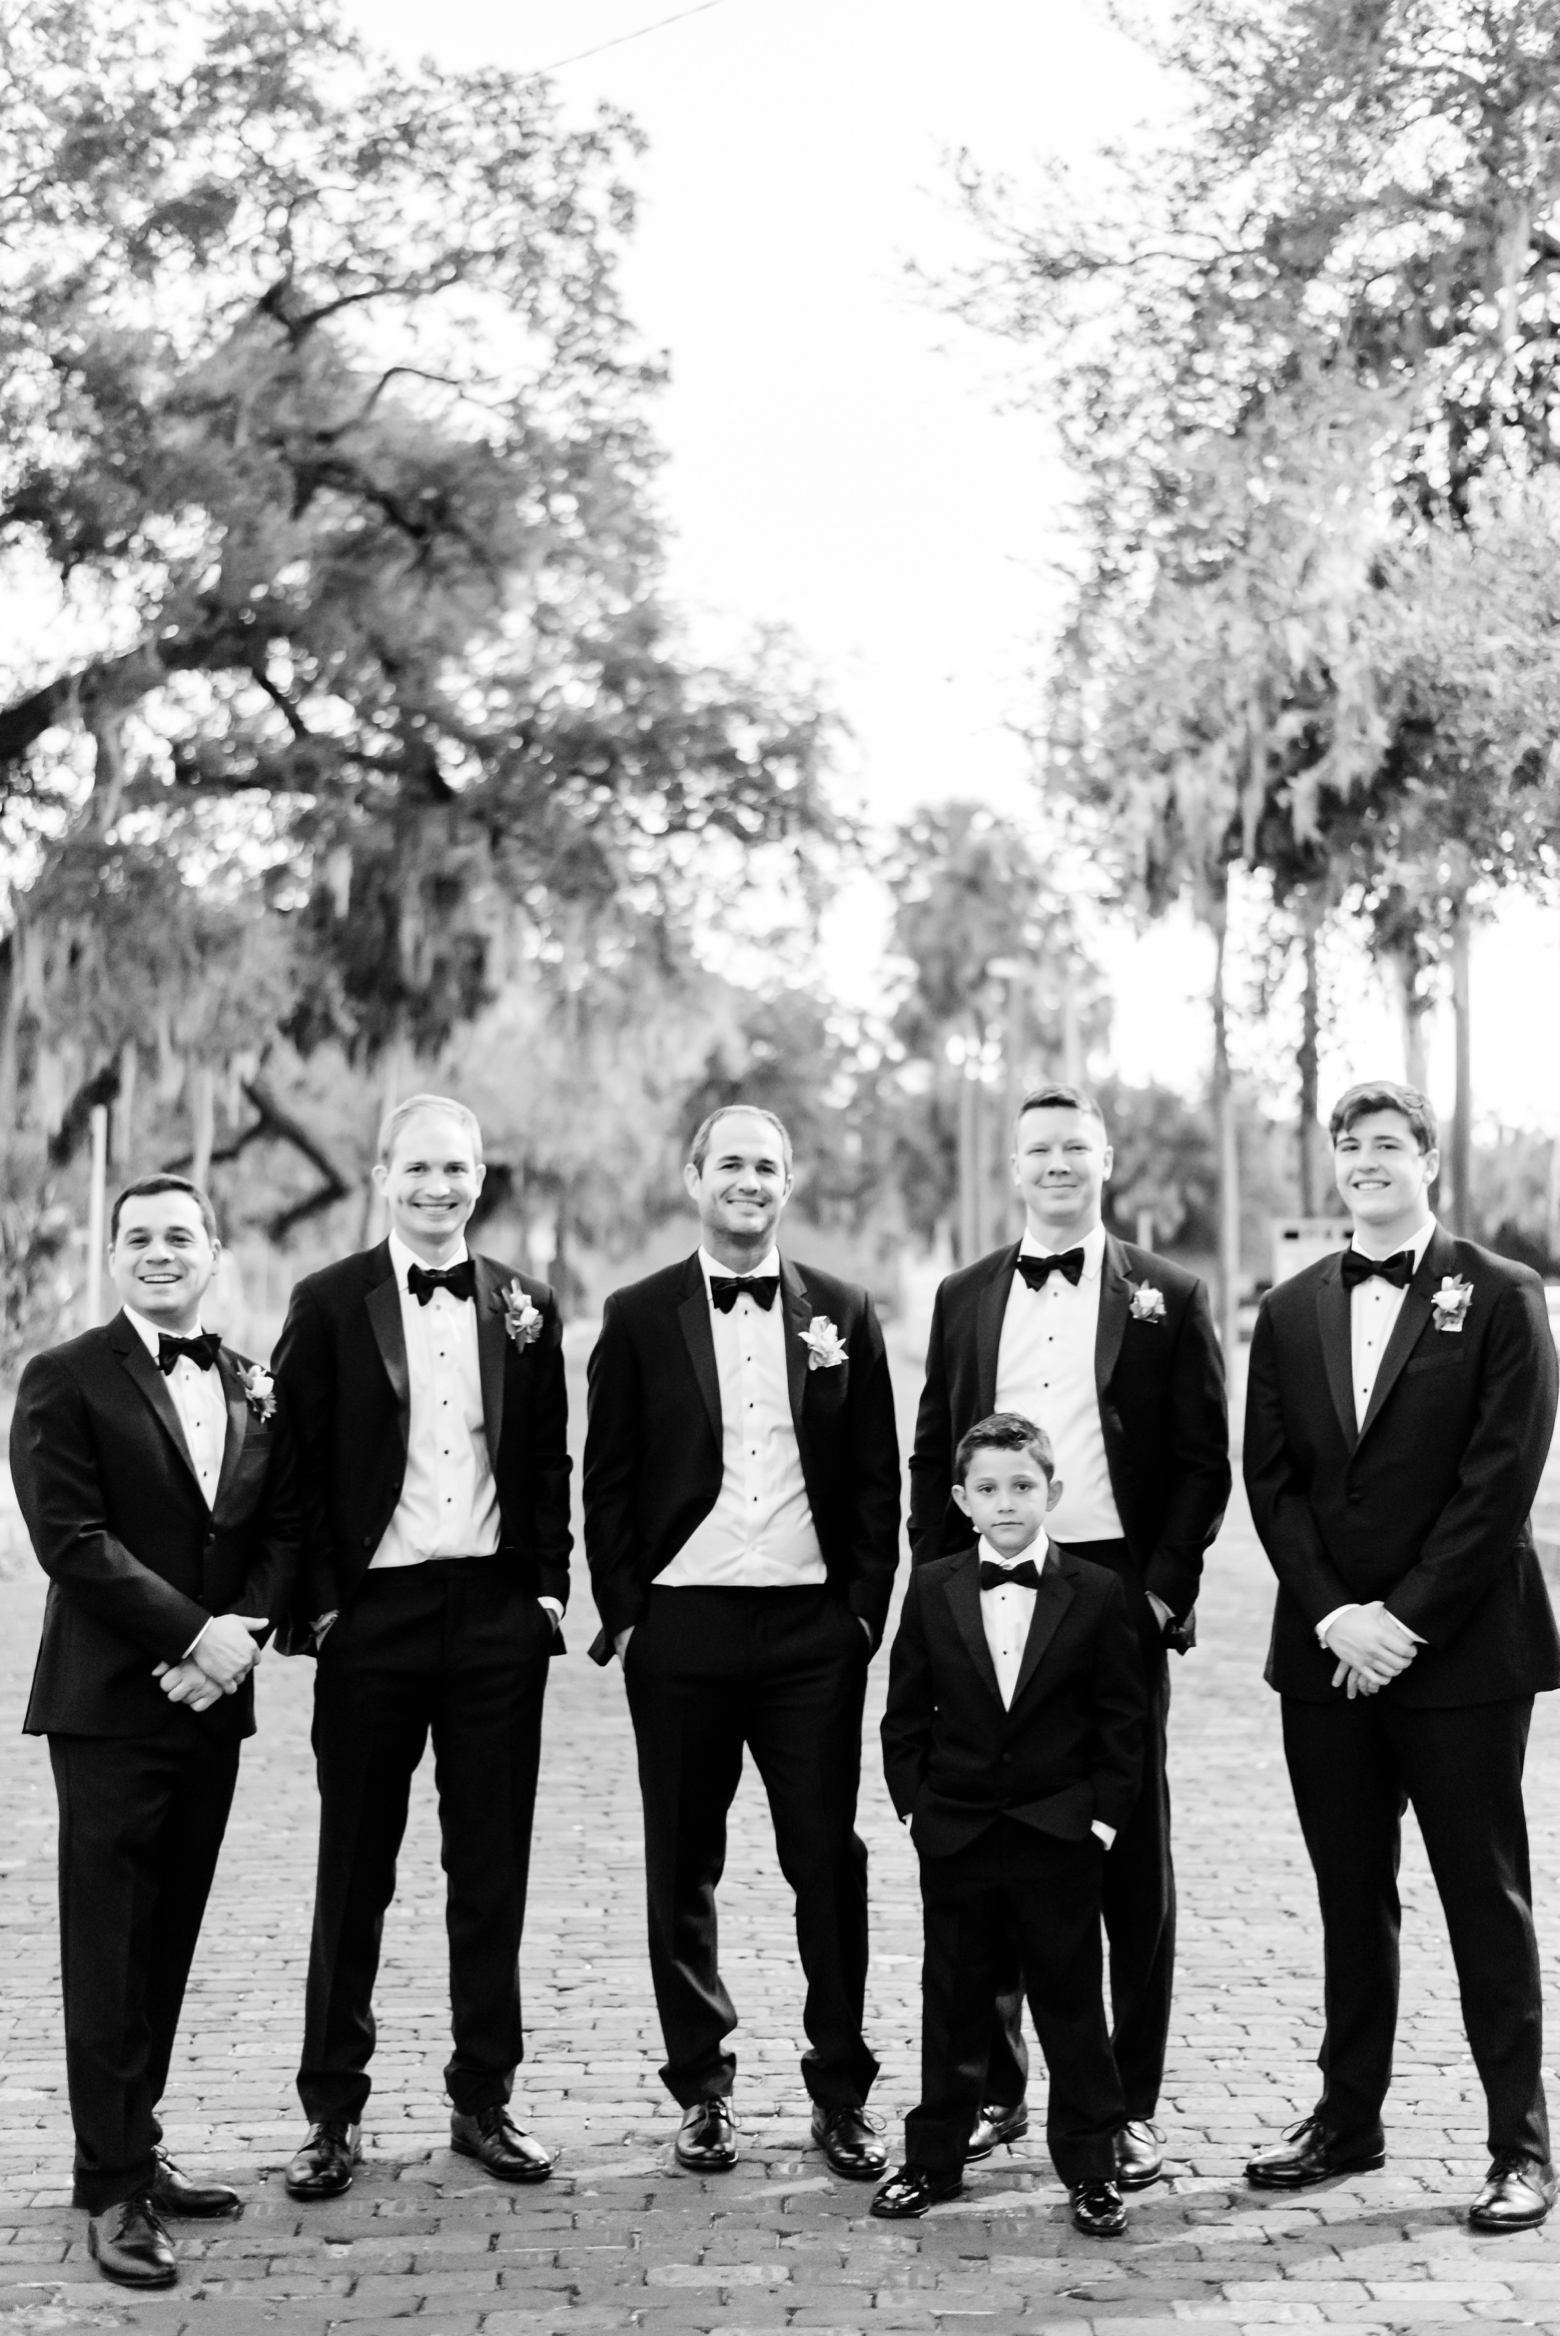 Groom and his Groomsmen in classic black and white pose for a formal photo in the street